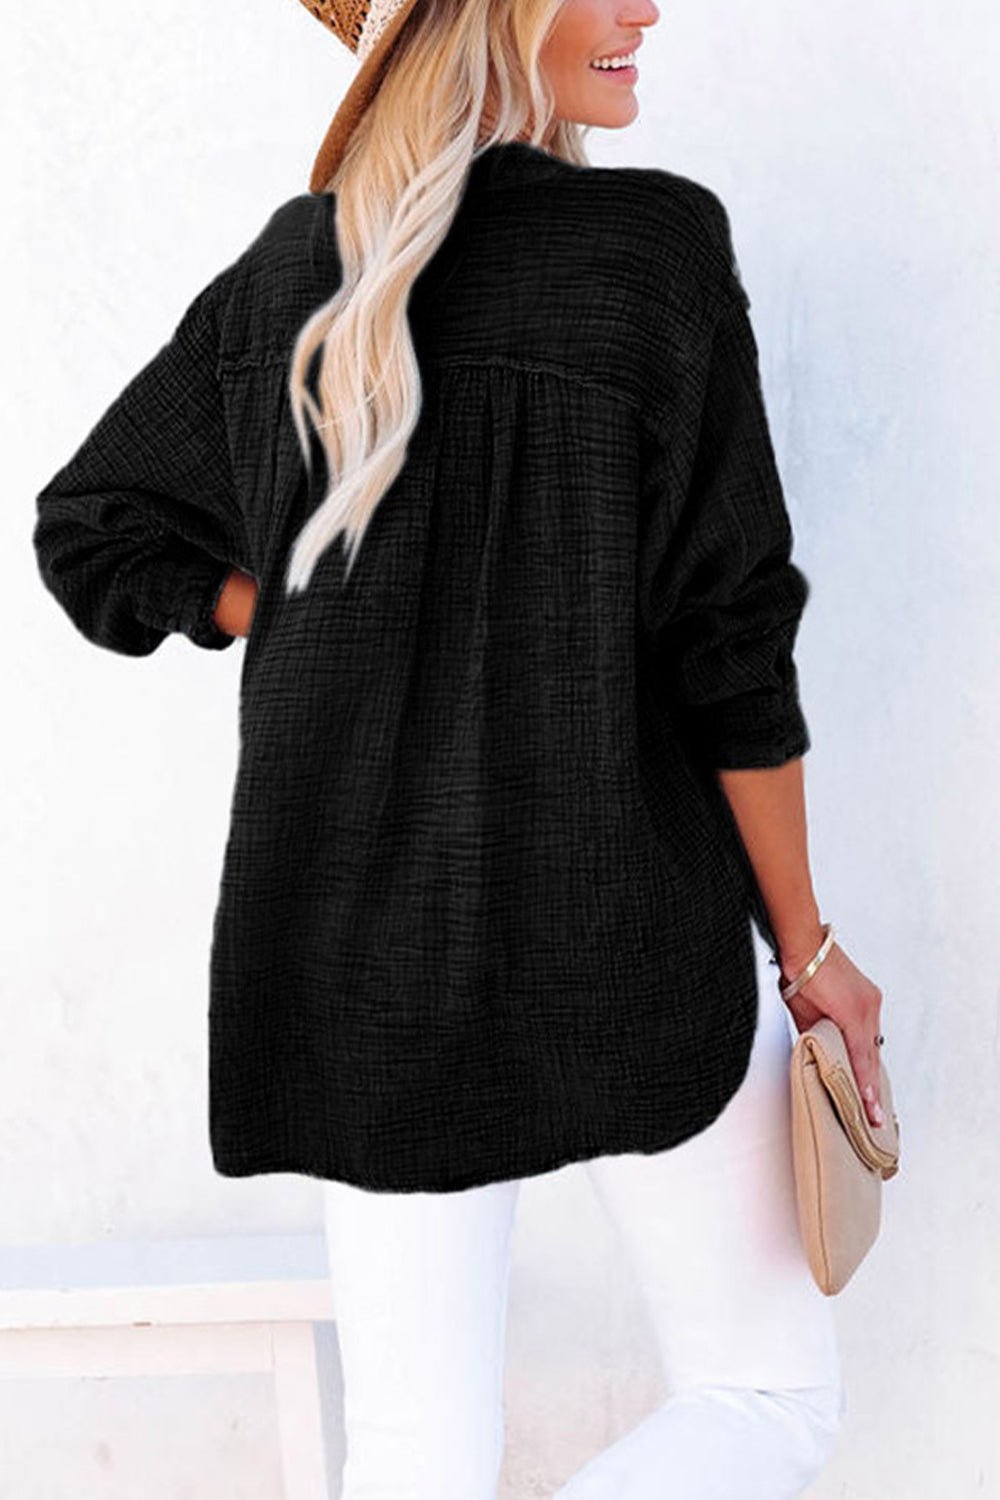 Buttoned Long Sleeve Blouse - Fashion Girl Online Store